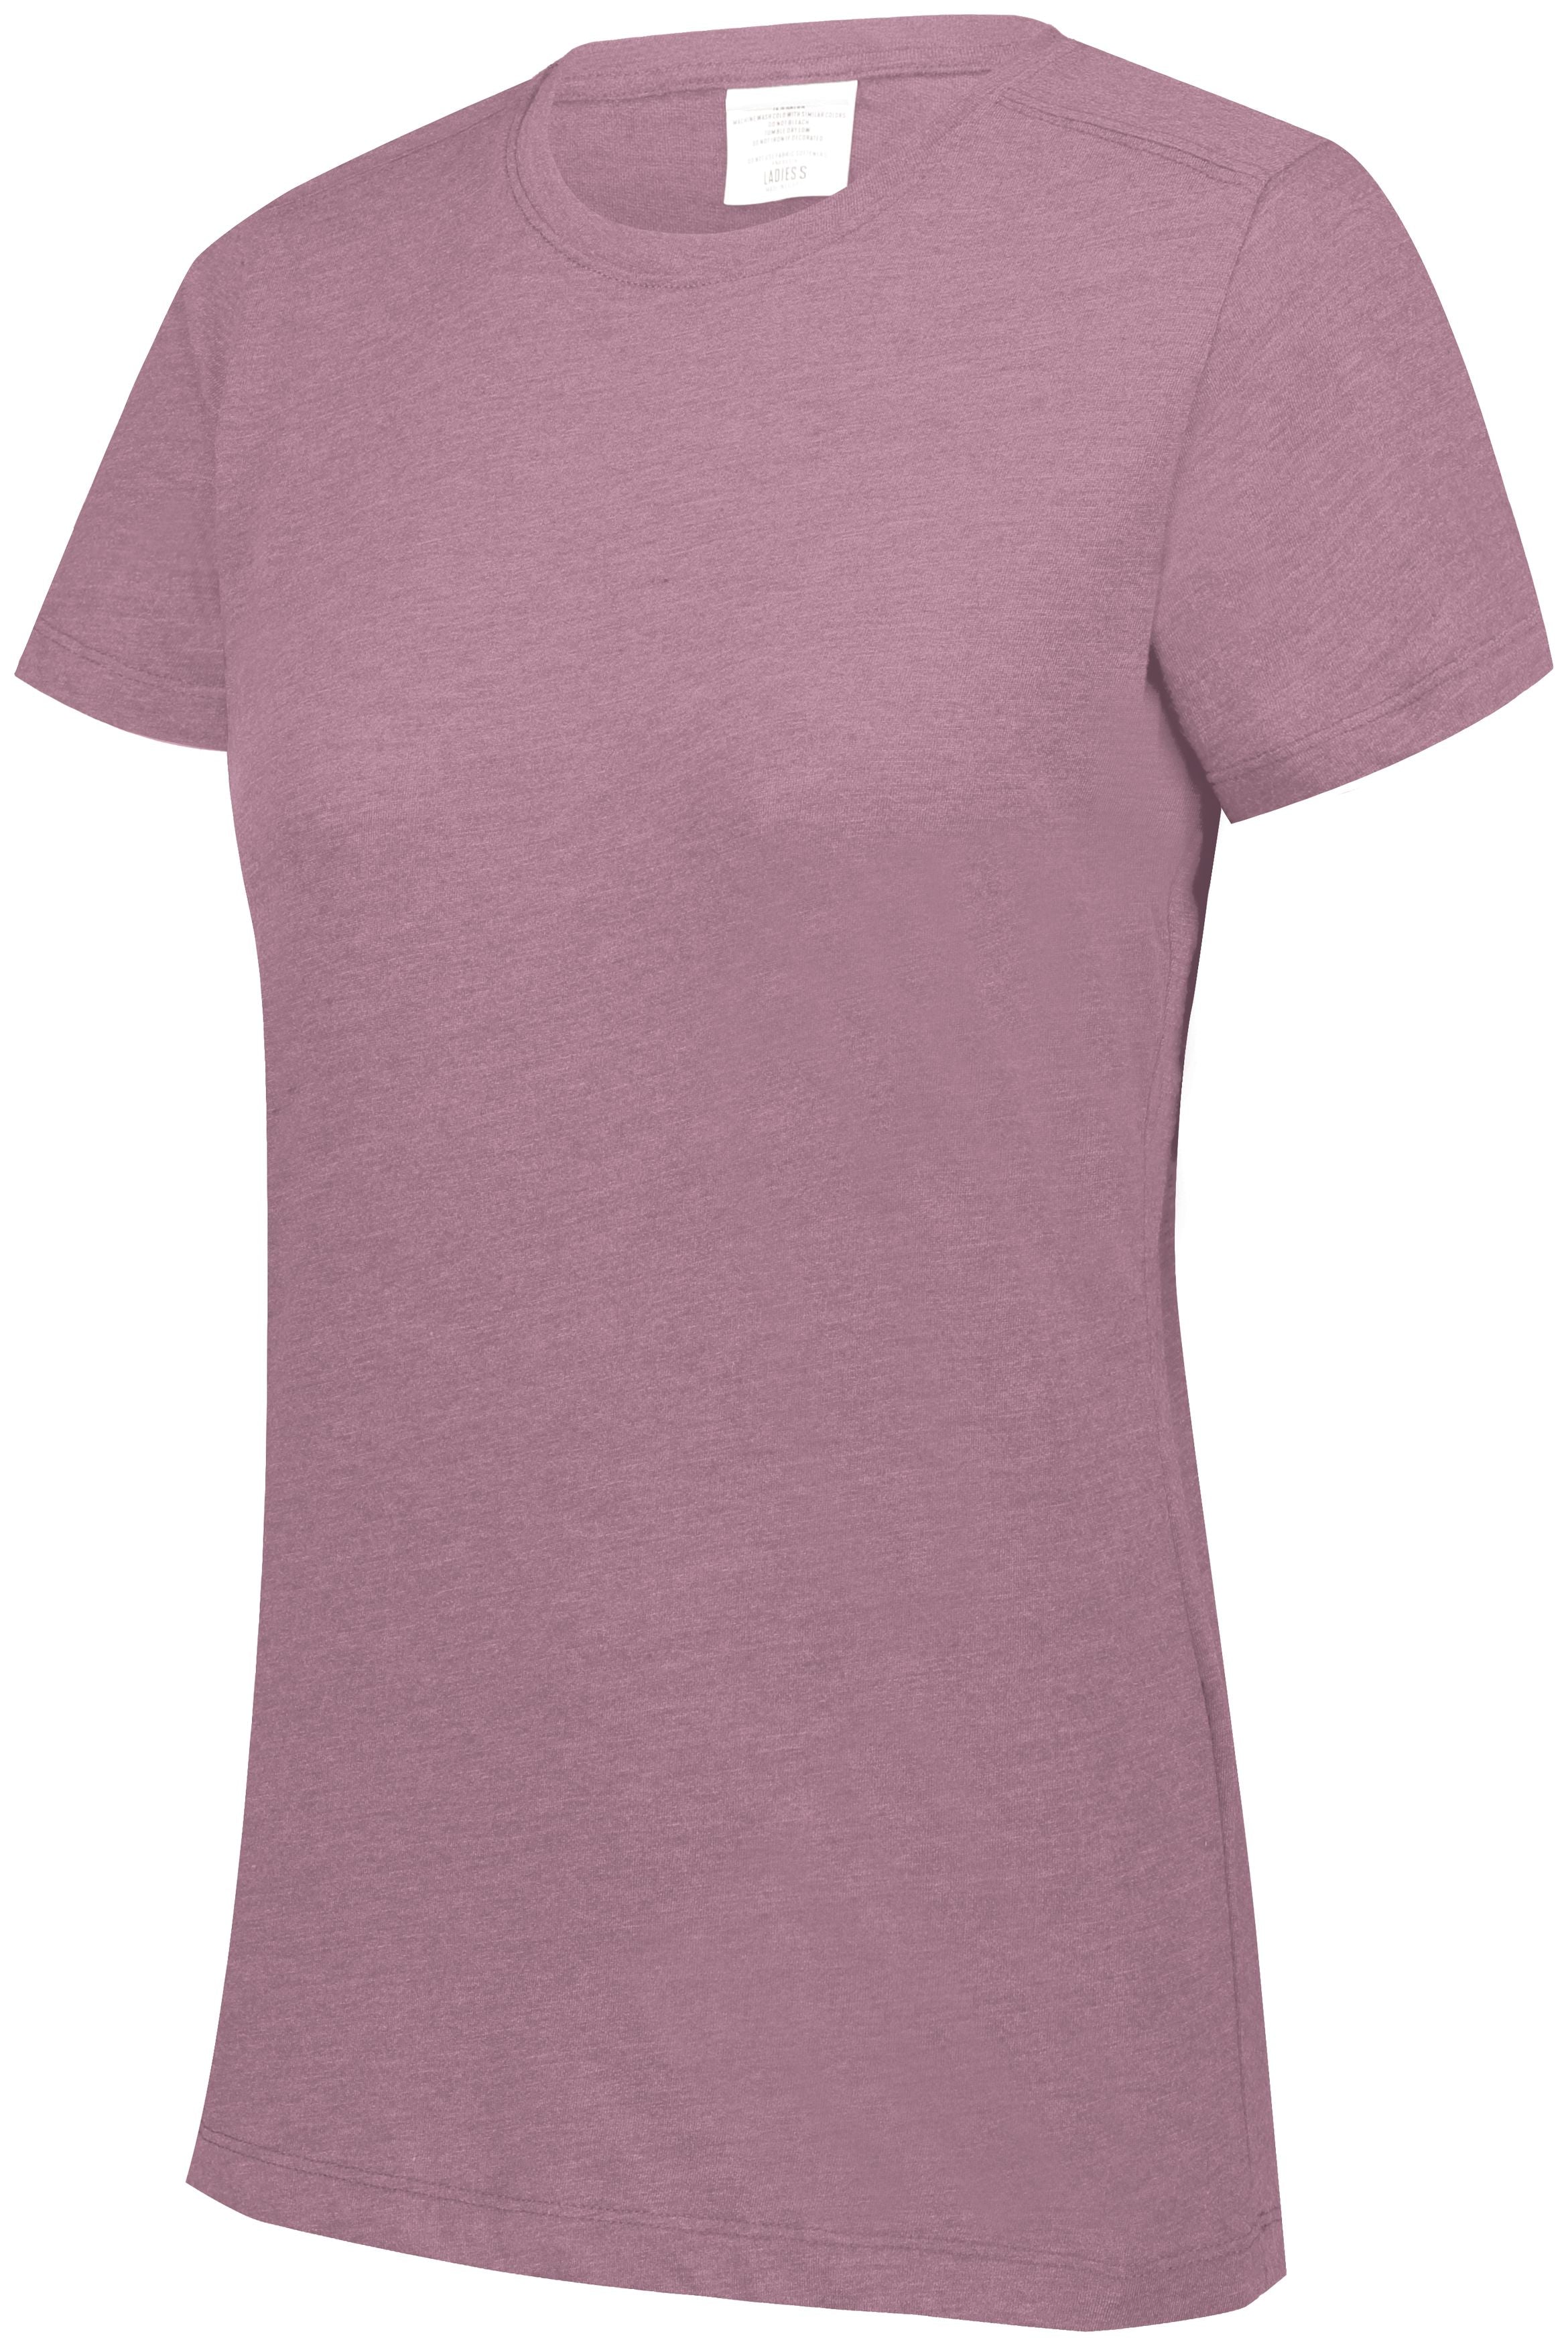 Augusta Sportswear Ladies Tri-Blend T-Shirt in Dusty Rose Heather  -Part of the Ladies, Ladies-Tee-Shirt, T-Shirts, Augusta-Products, Shirts product lines at KanaleyCreations.com